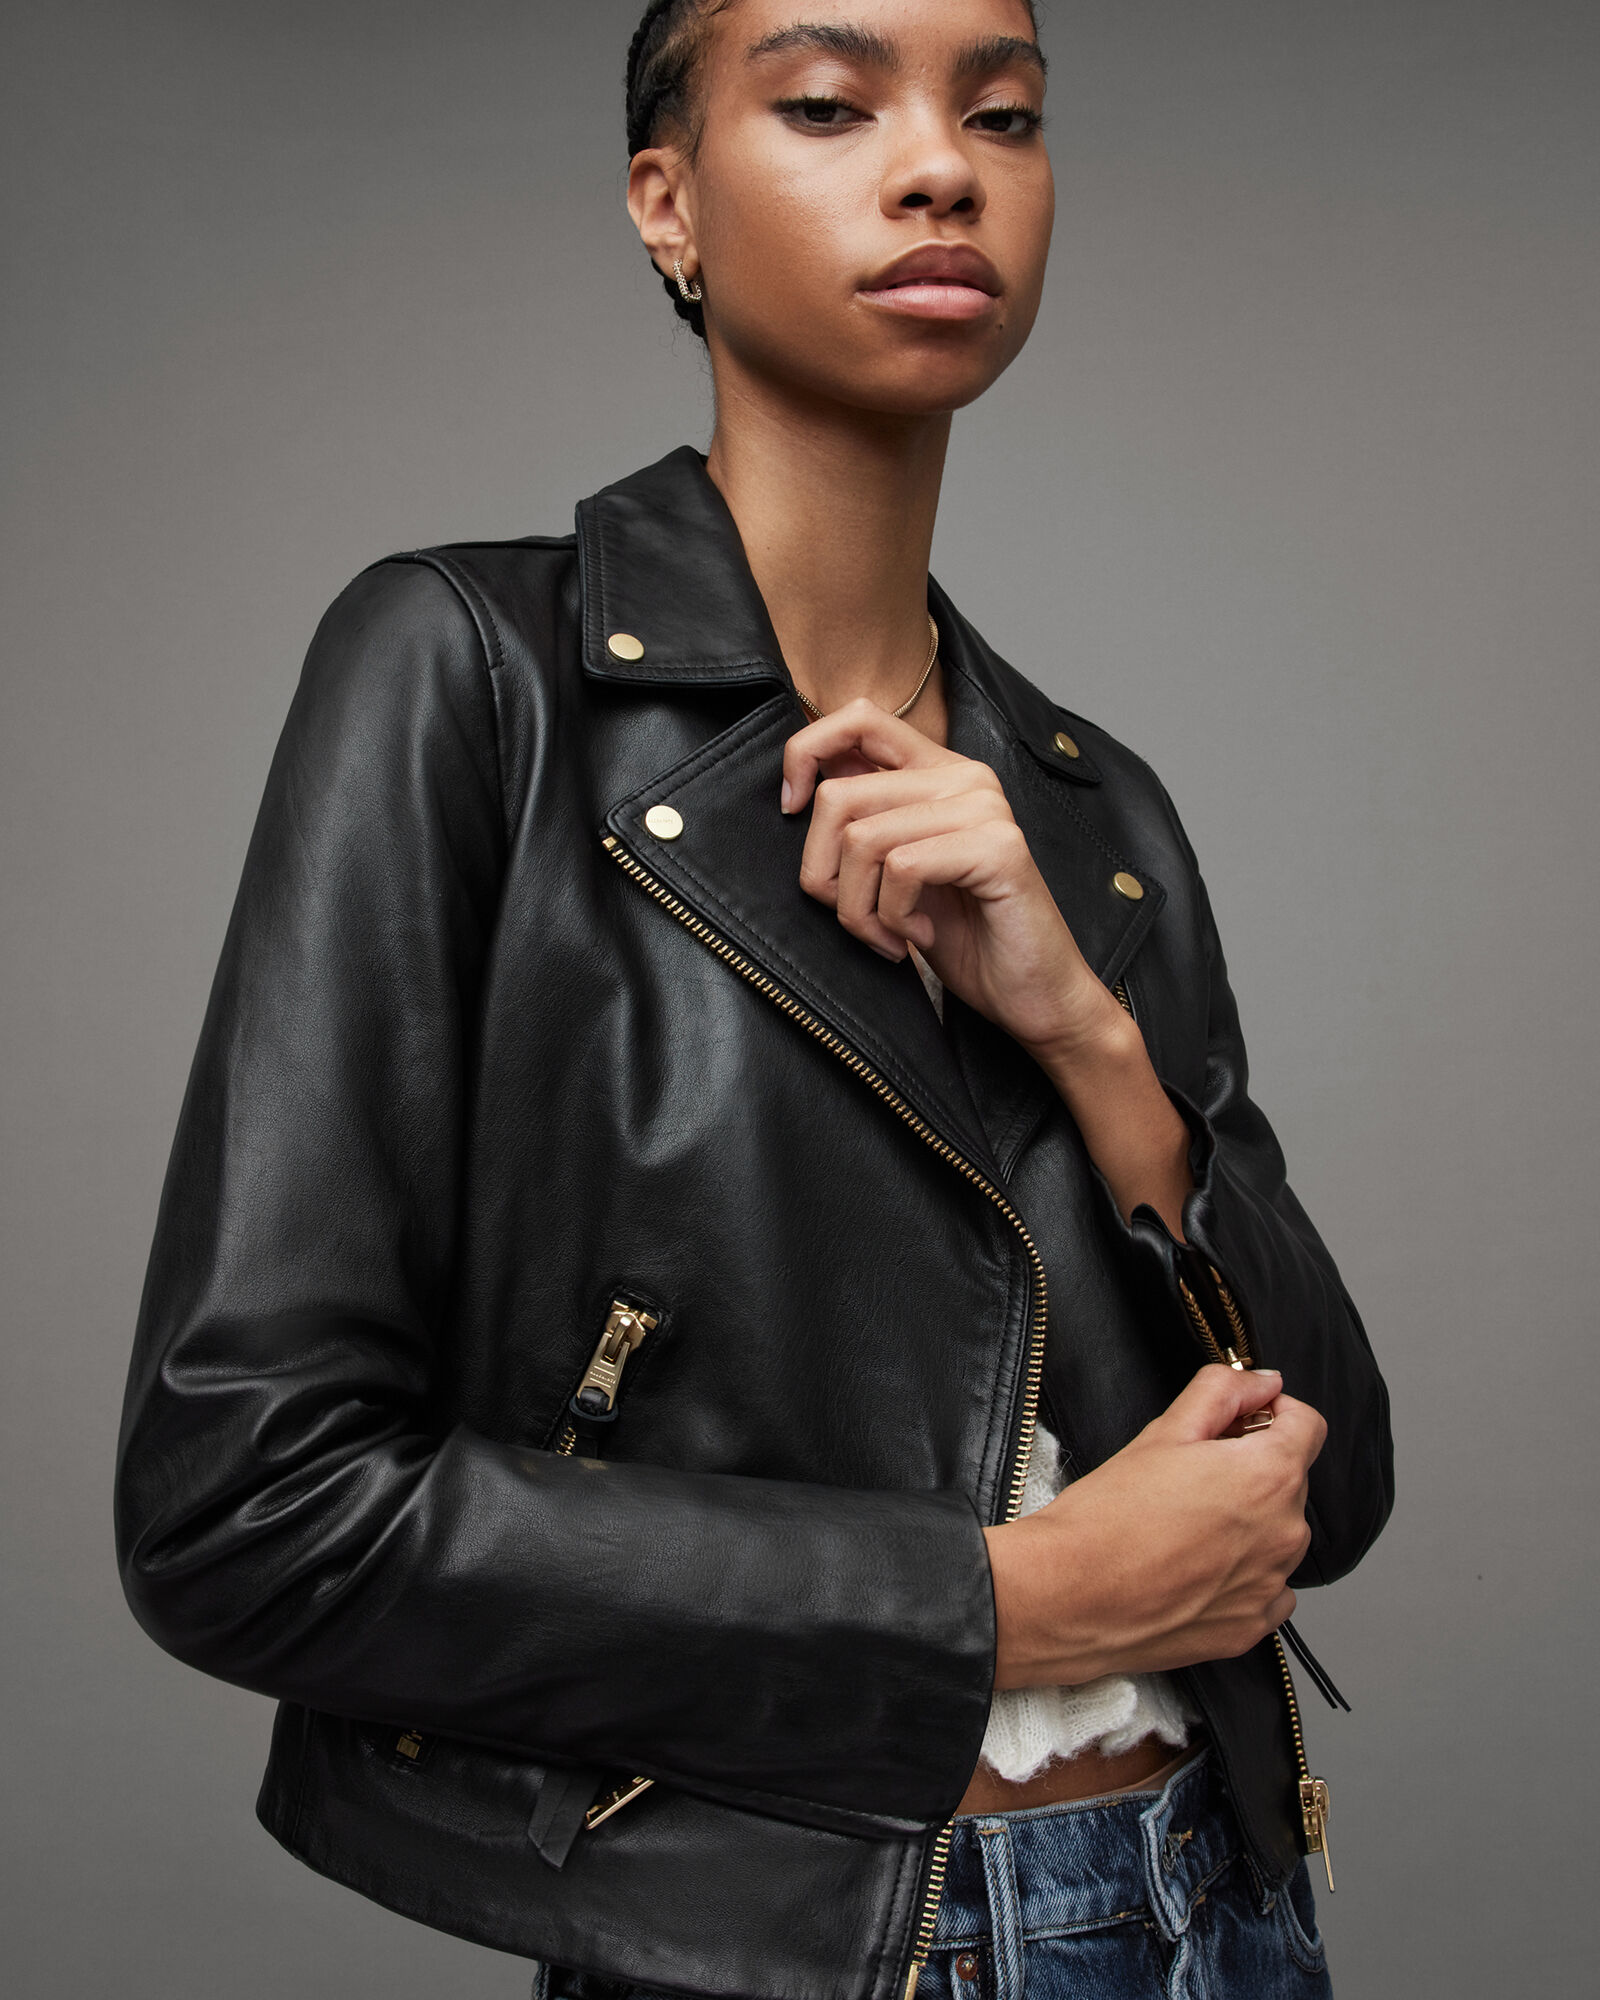 Women's Leather Clothing & Outfits | Leather Dresses | ALLSAINTS